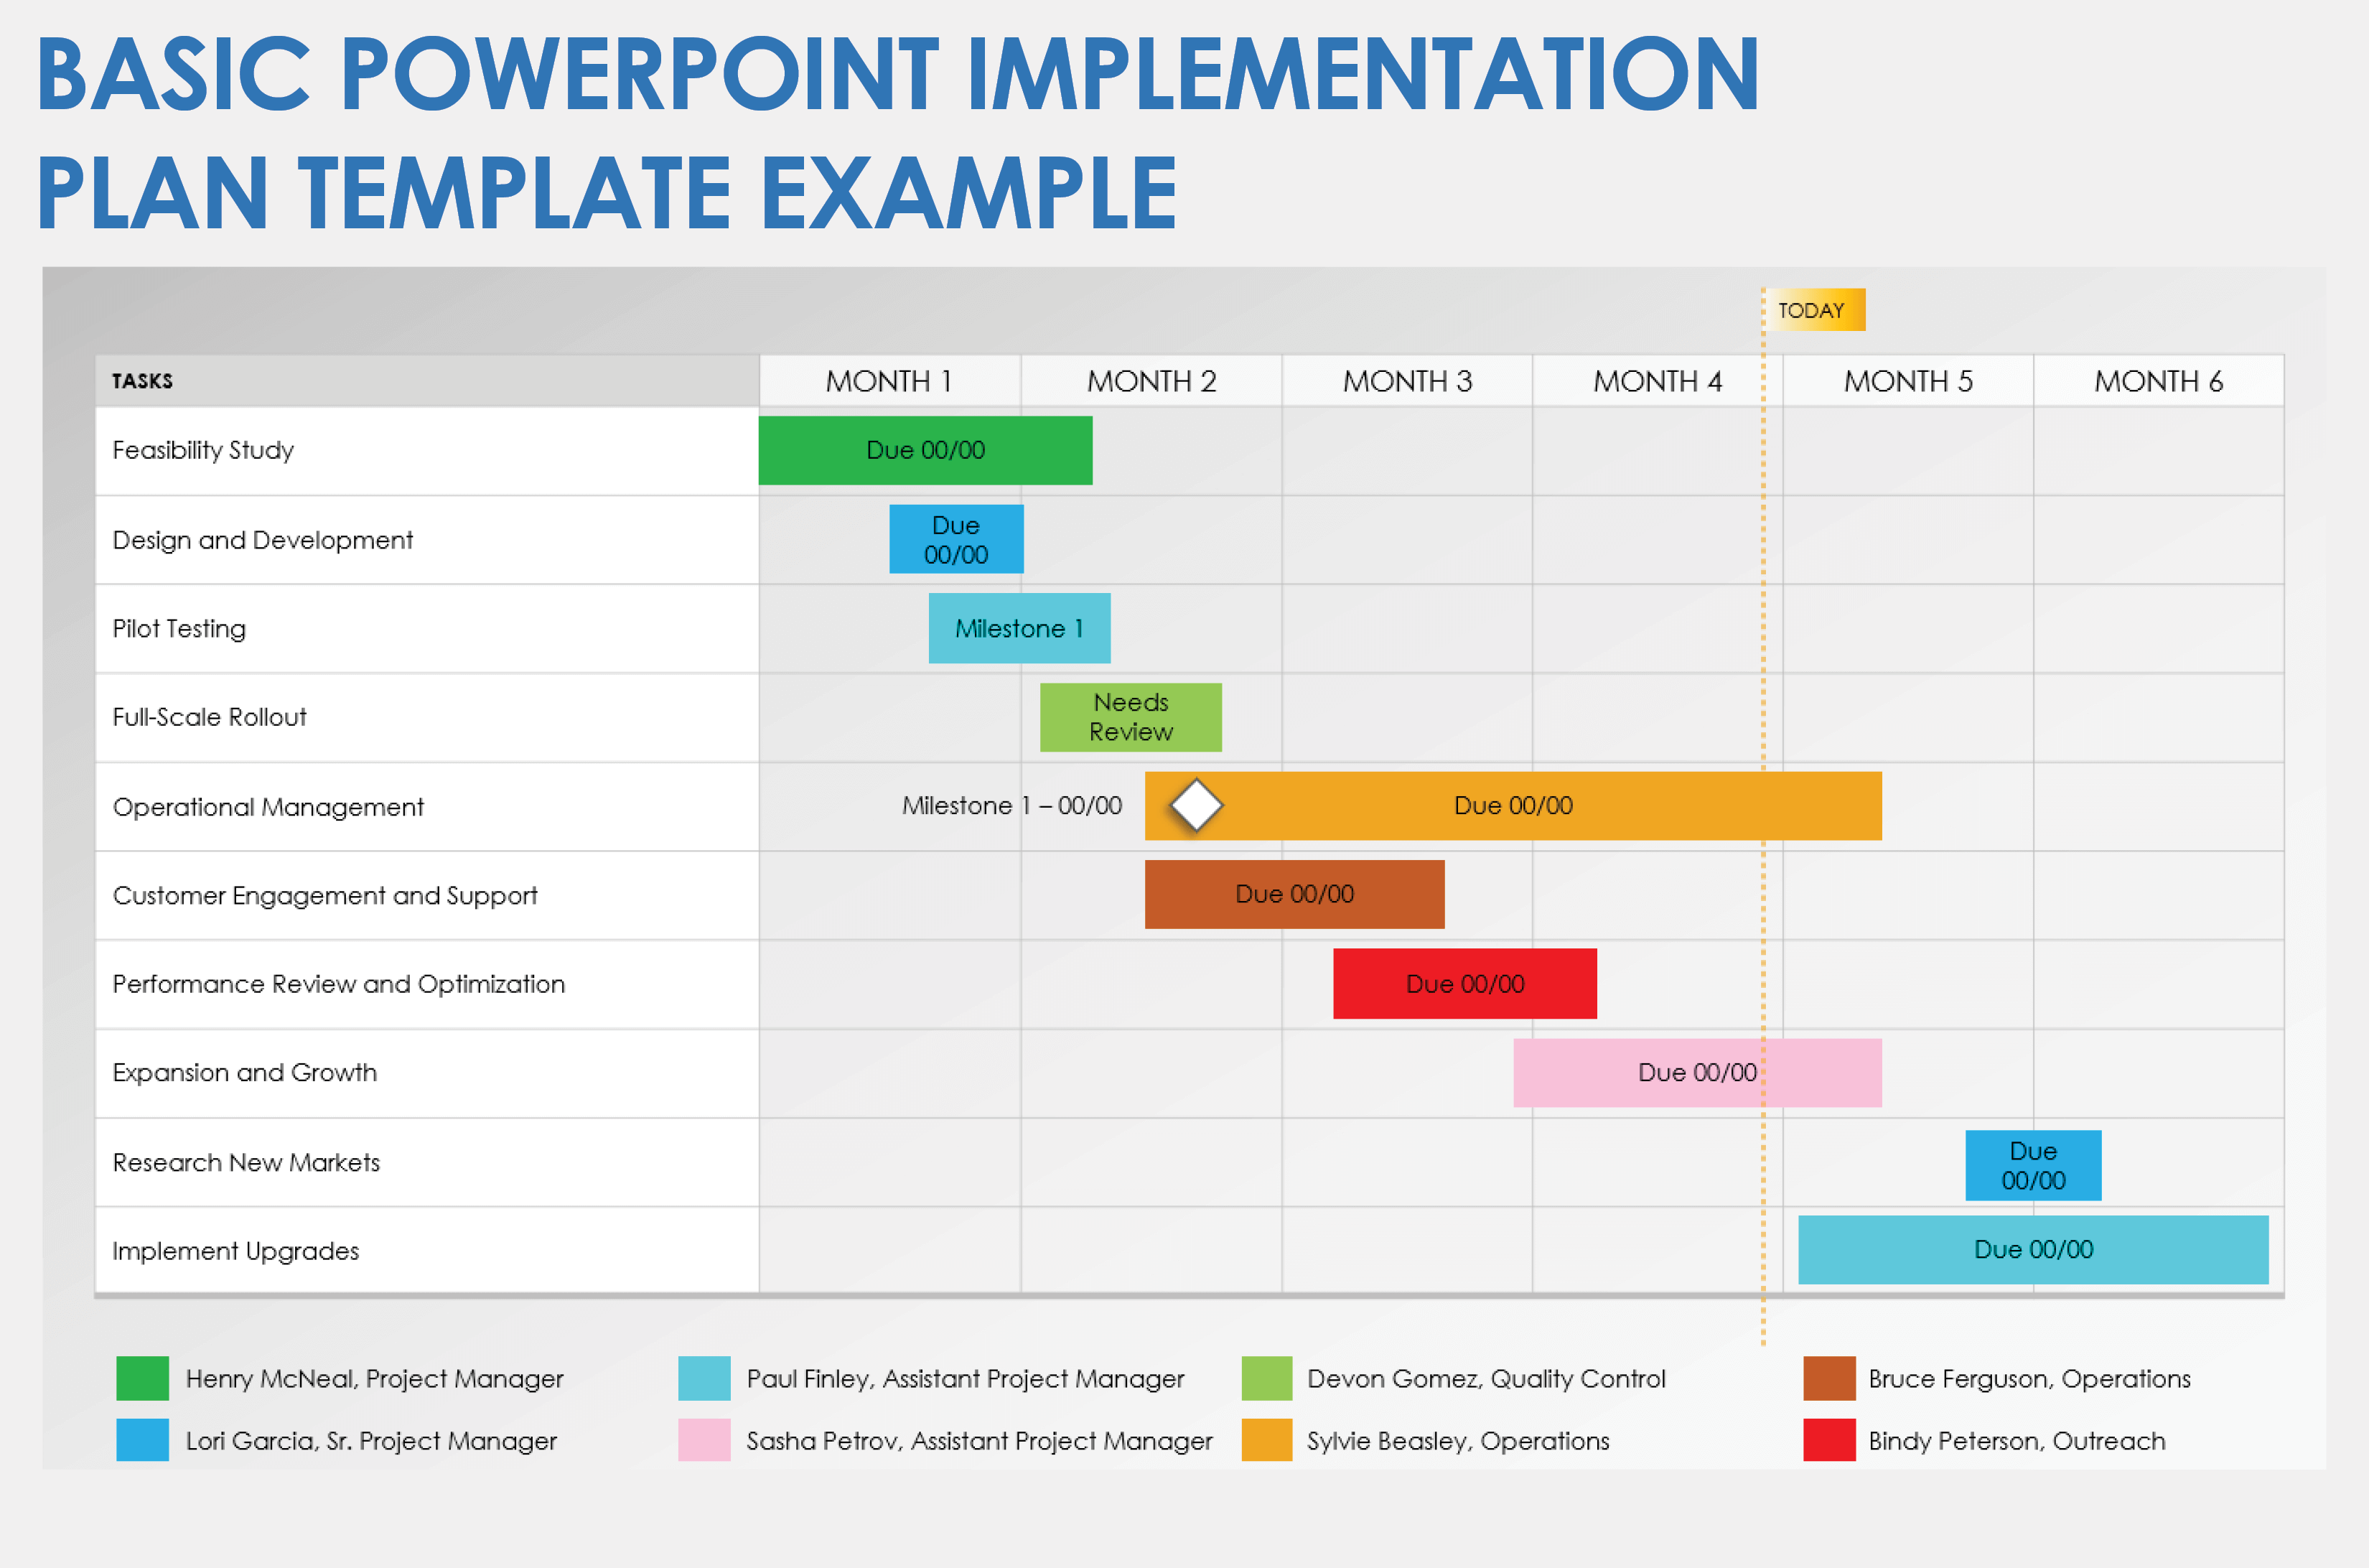 Basic PowerPoint Implementation Plan Example Template